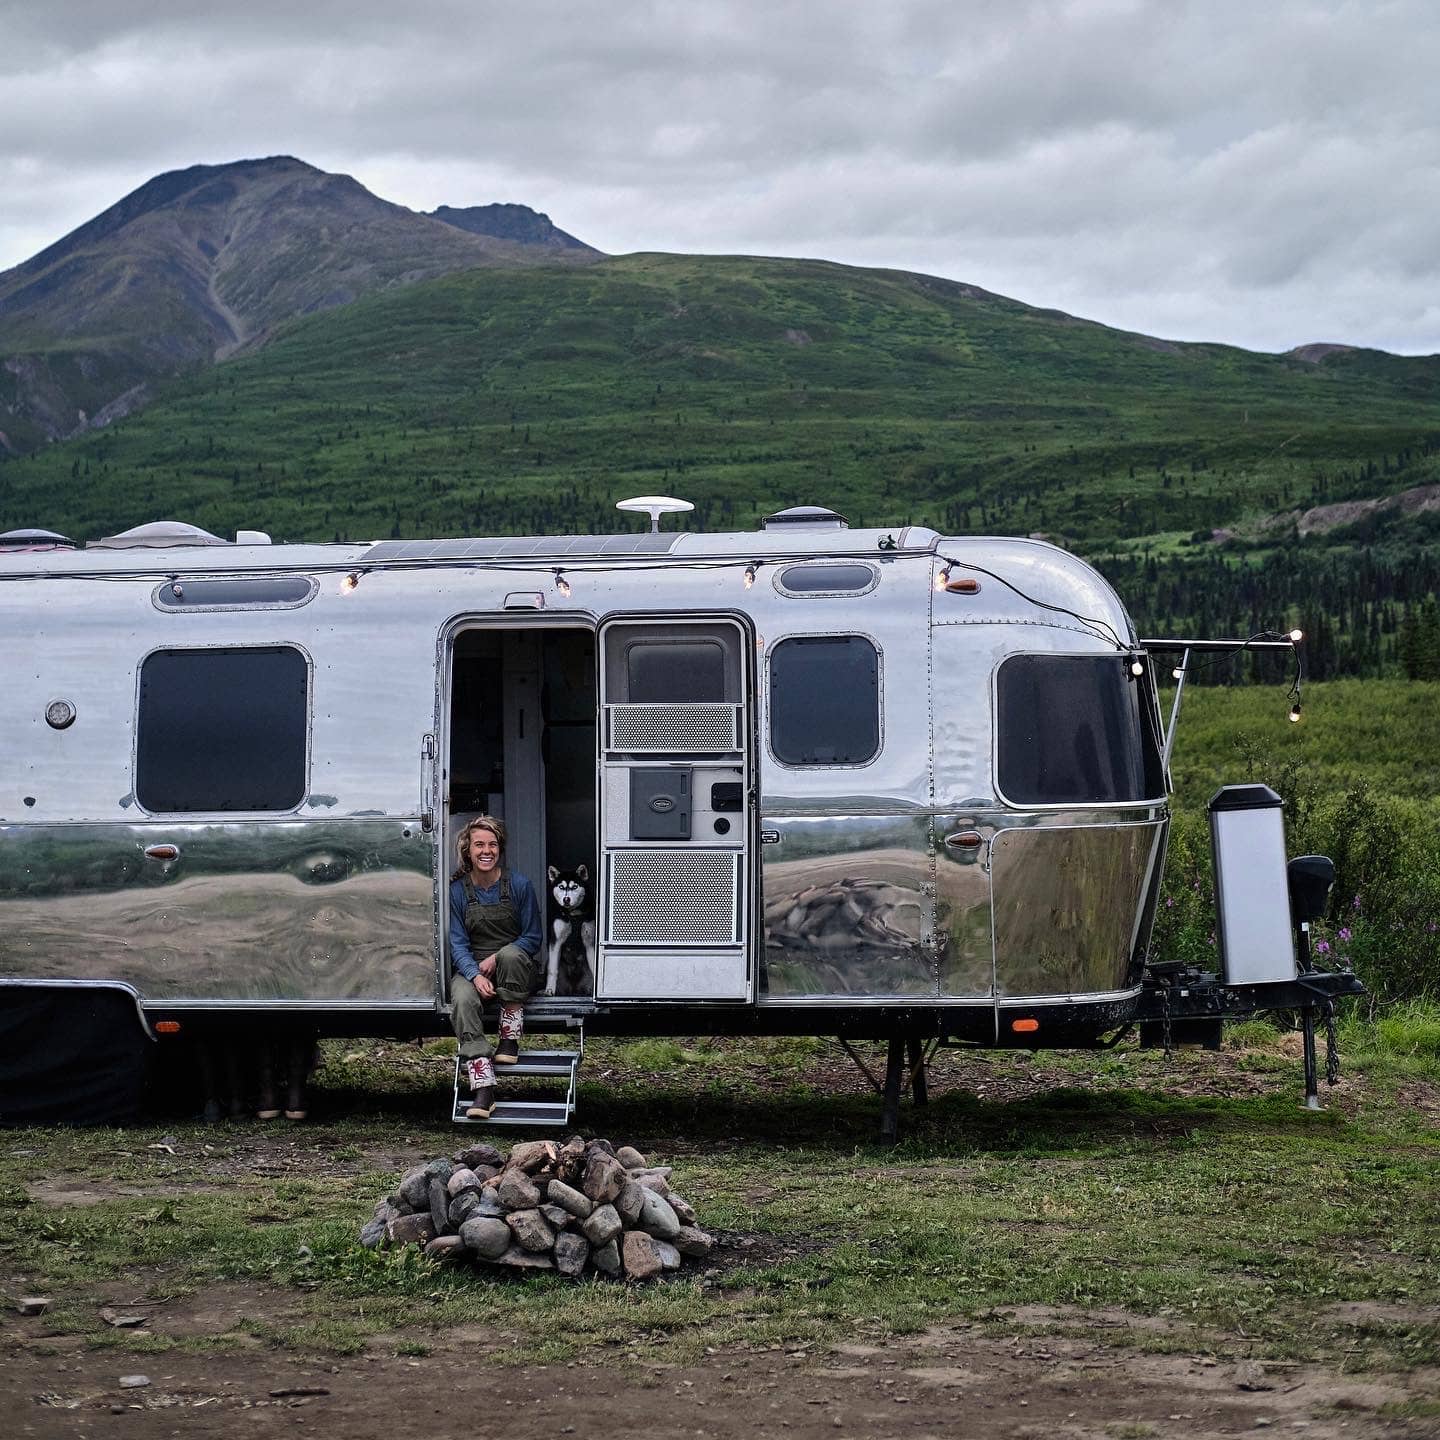 Kendall Strachan and Her Puppy in the Doorway of Their Airstream in Alaska